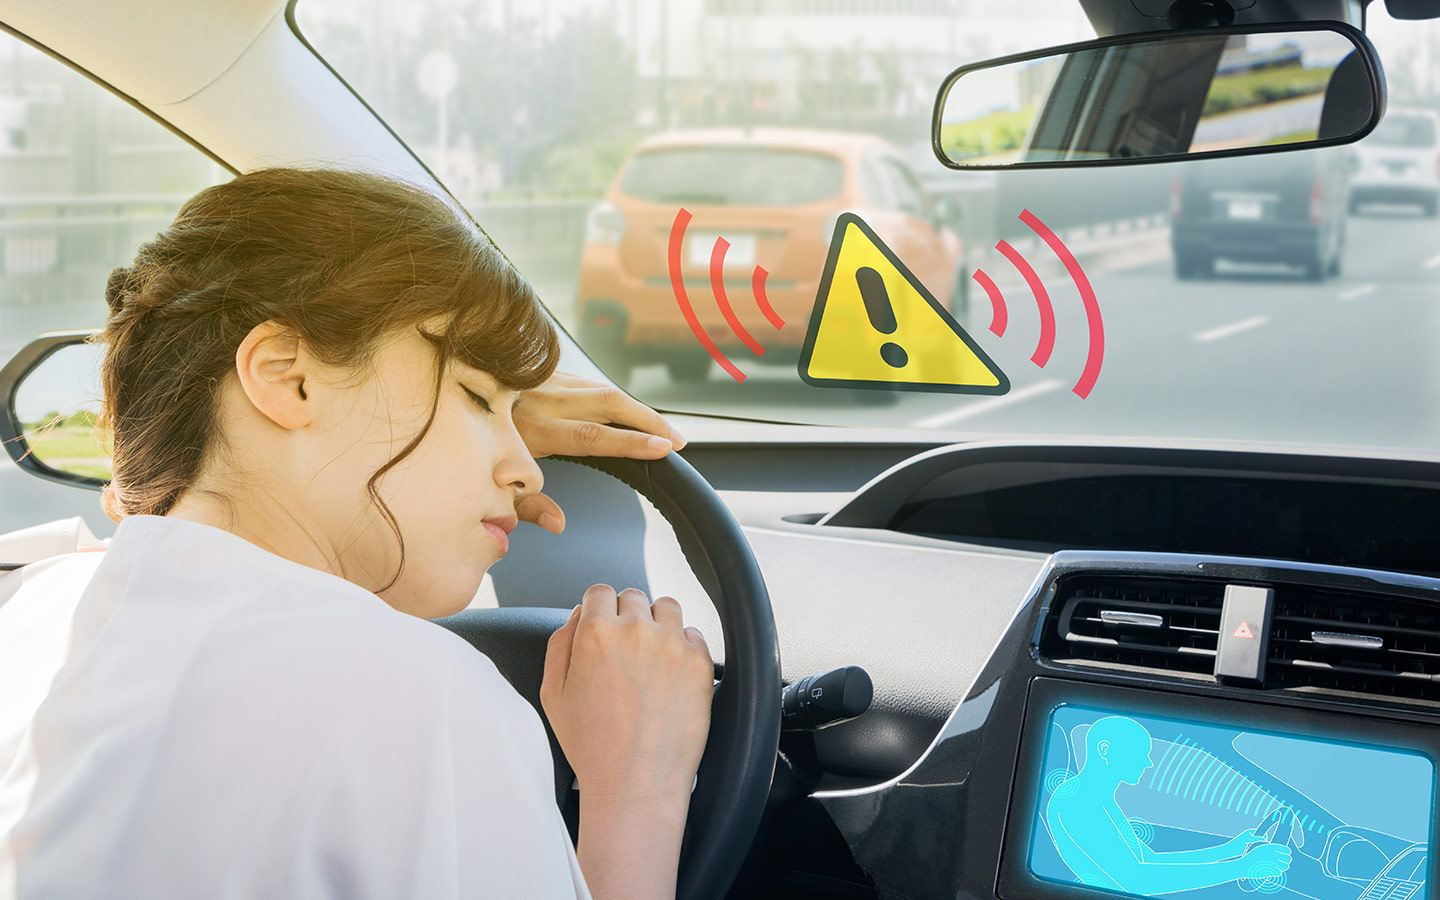 driver fatigue detection system is part of advanced driver assistance system